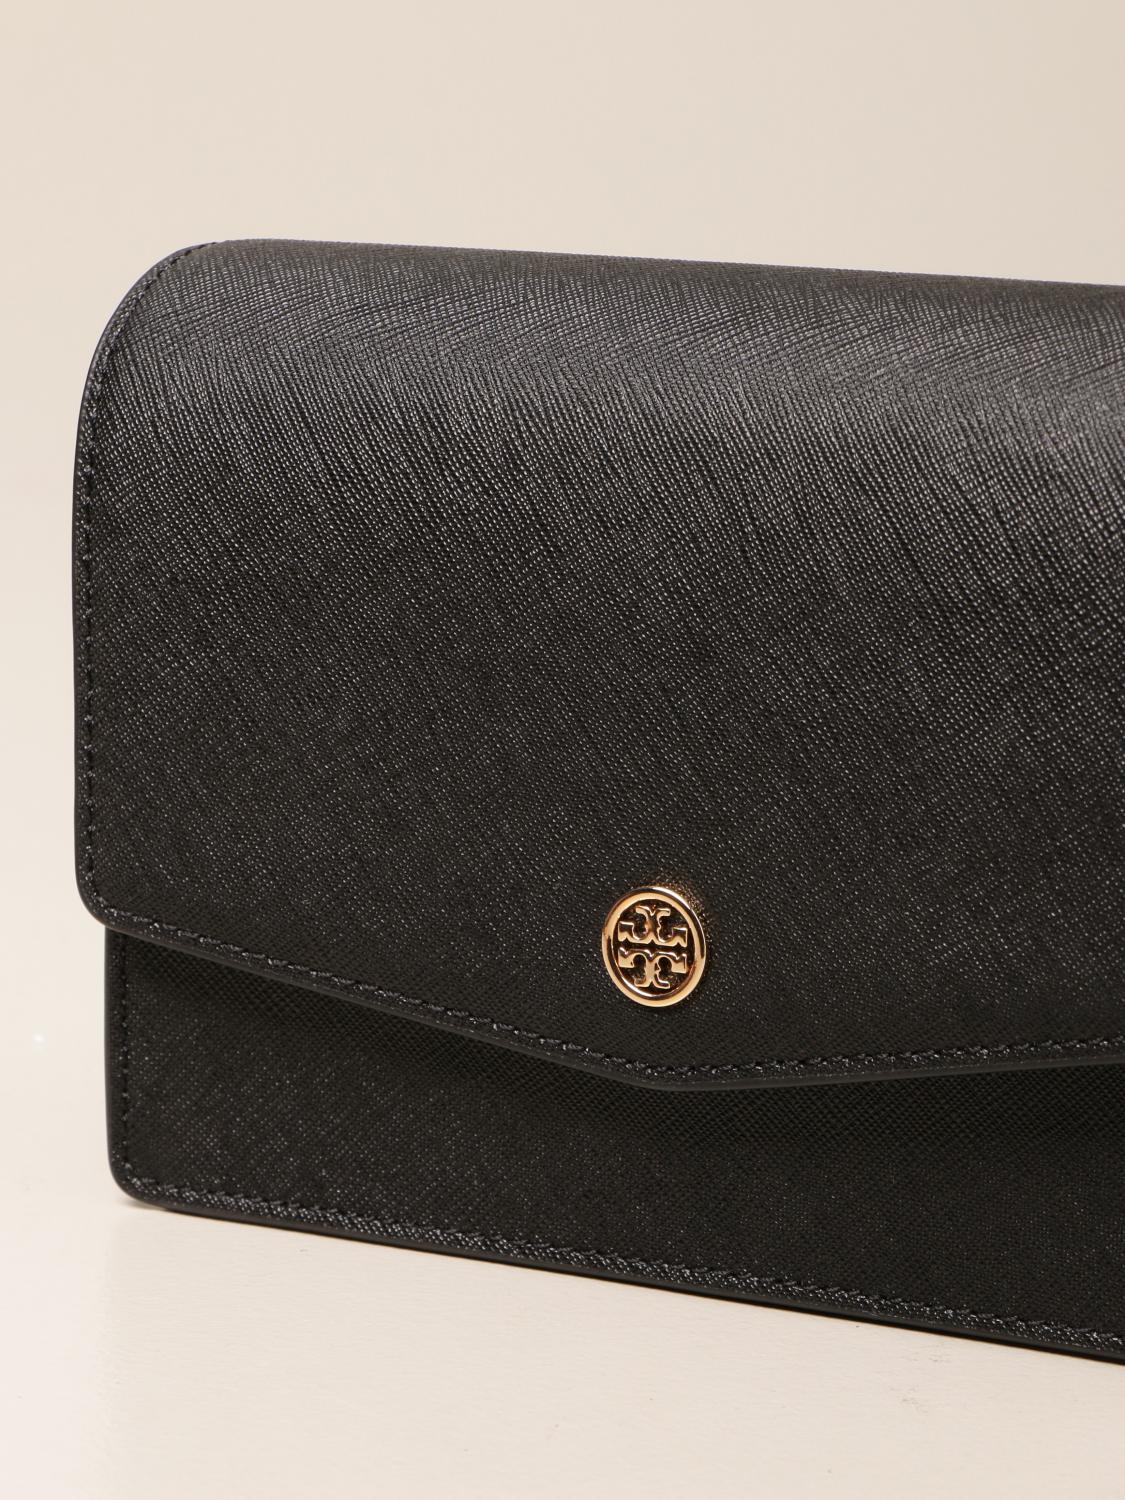 ✨ TORY BURCH SAFFIANO LEATHER BAG✨ IDR 2.650.000 Open Pre Order for 14-20  days.